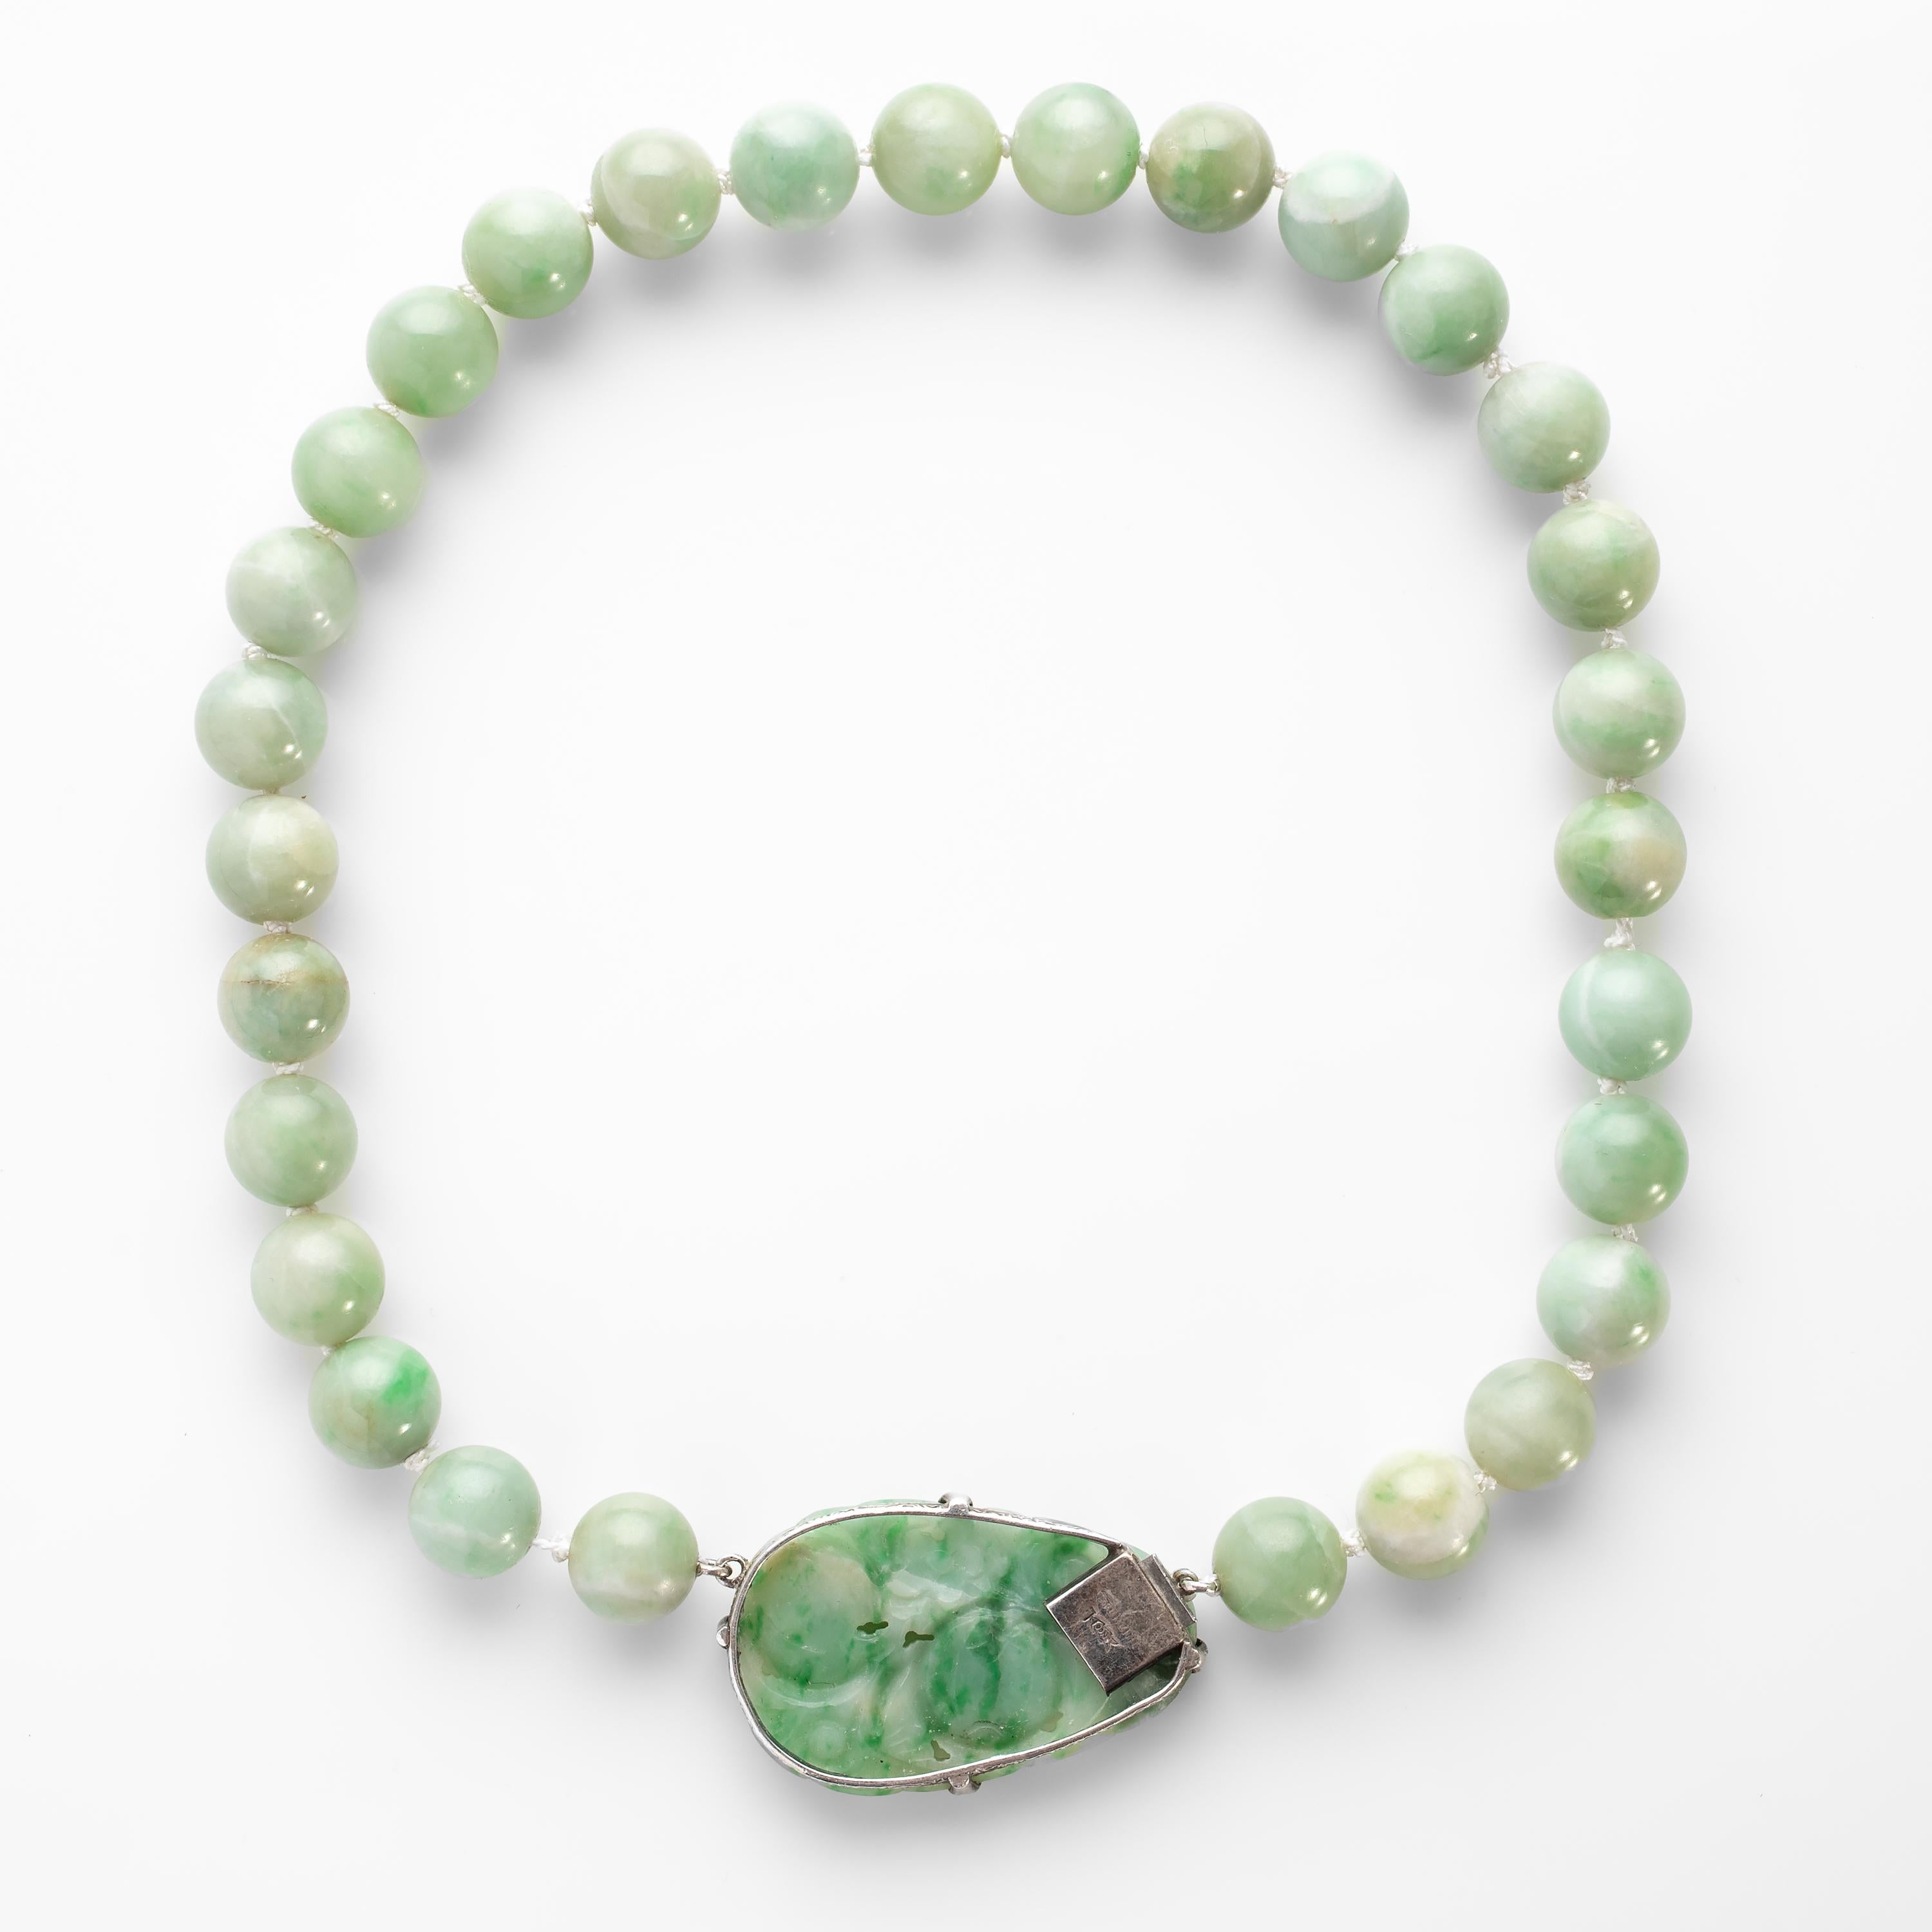 Art Deco Jadeite Jade Necklace with Carved Clasp Certified Untreated 1